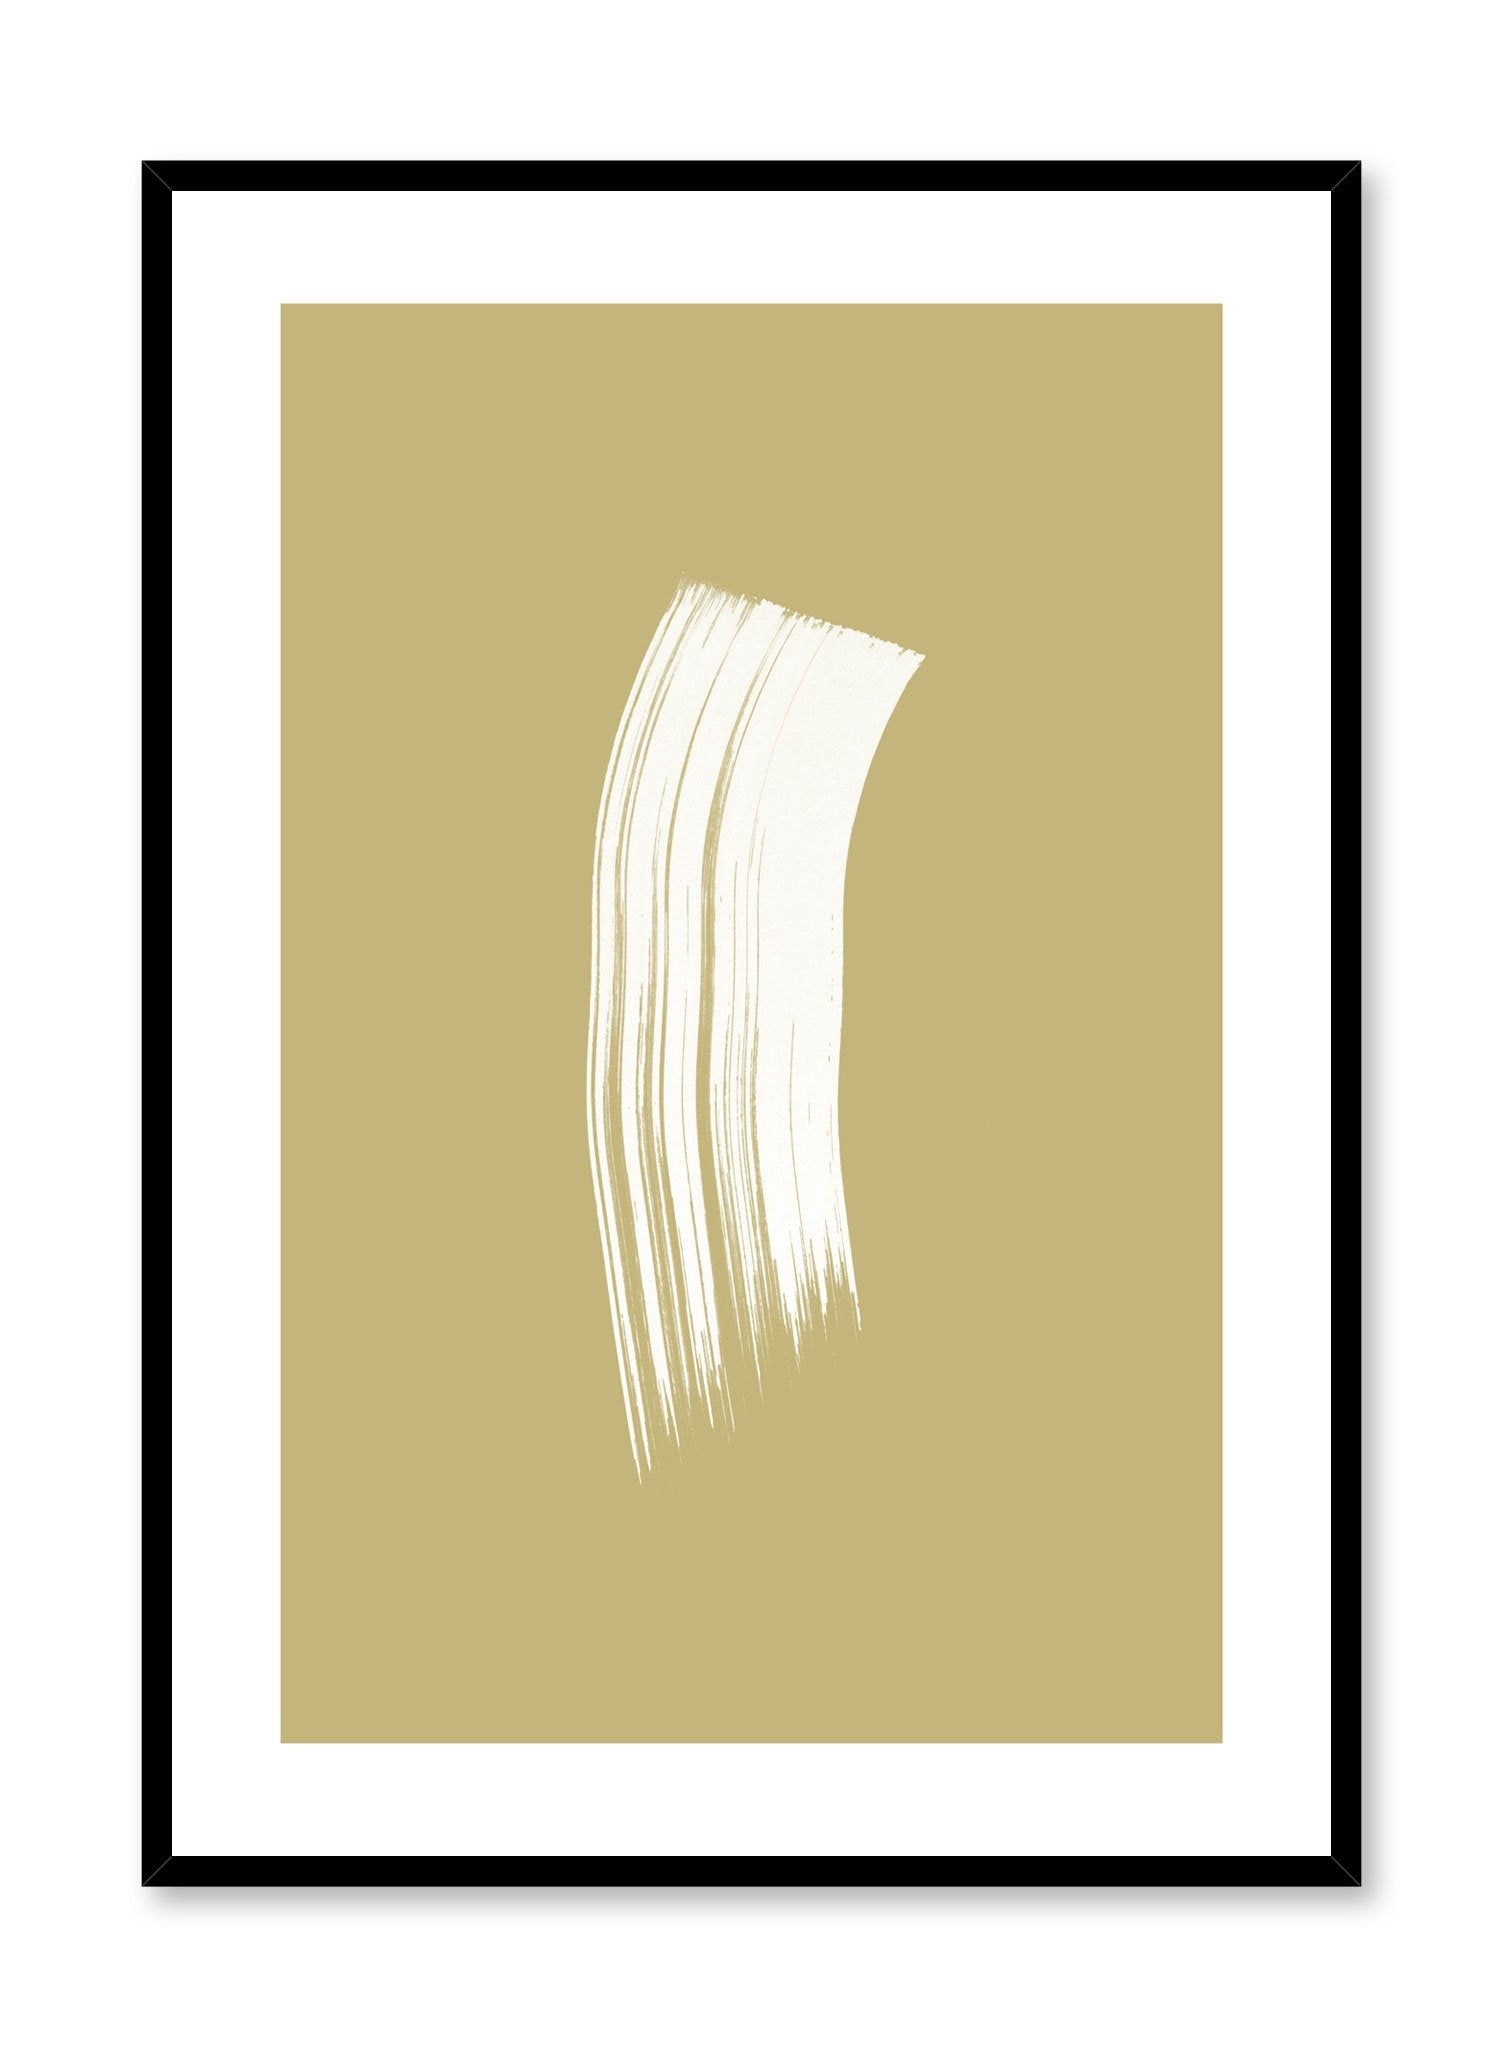 Modern minimalist poster by Opposite Wall with gold and white design